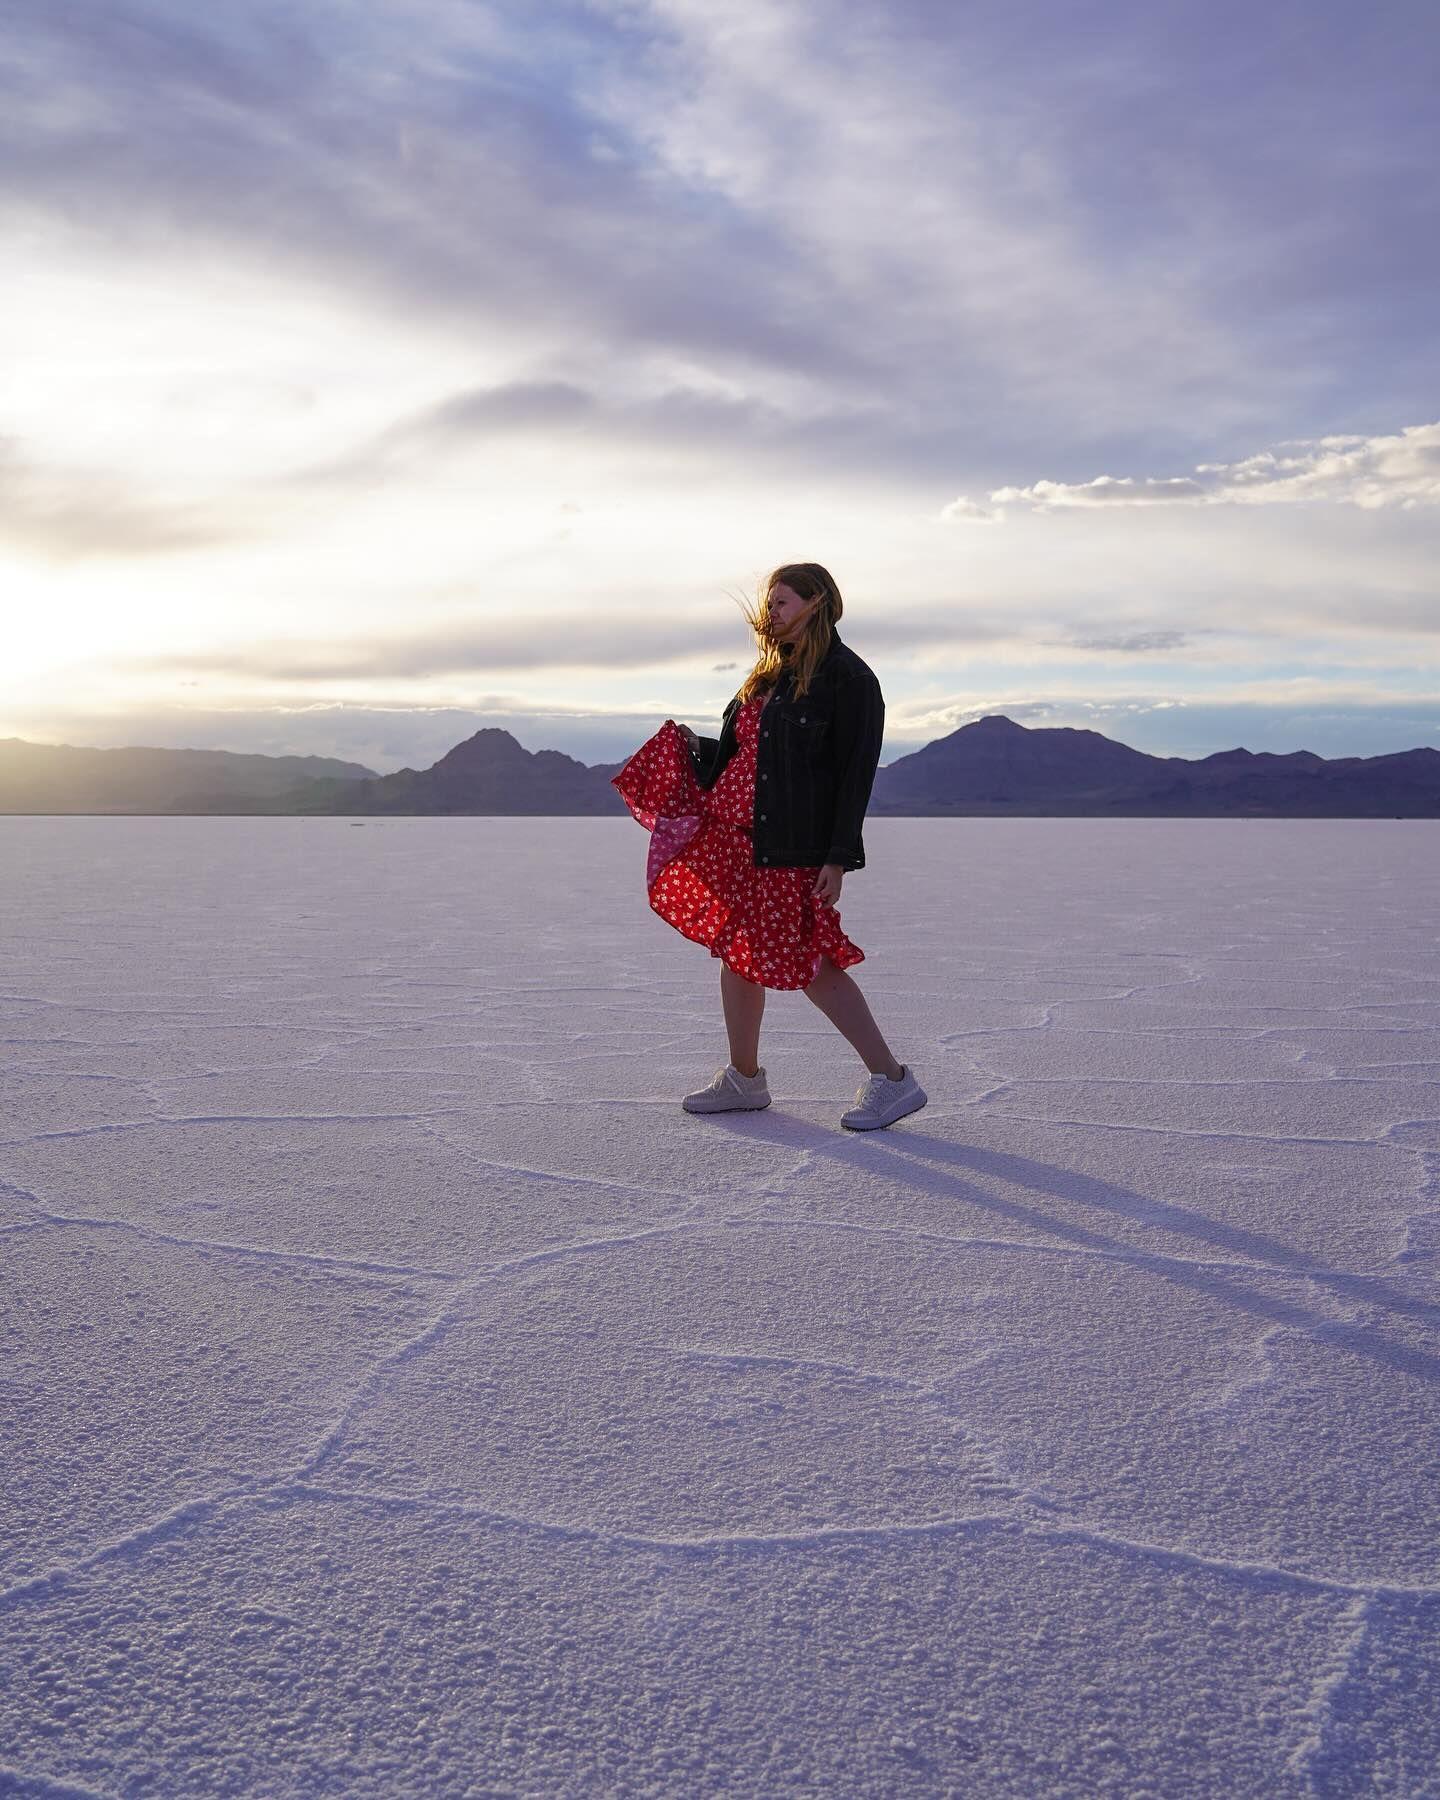 Have you been to the Bonneville Salt Flats?